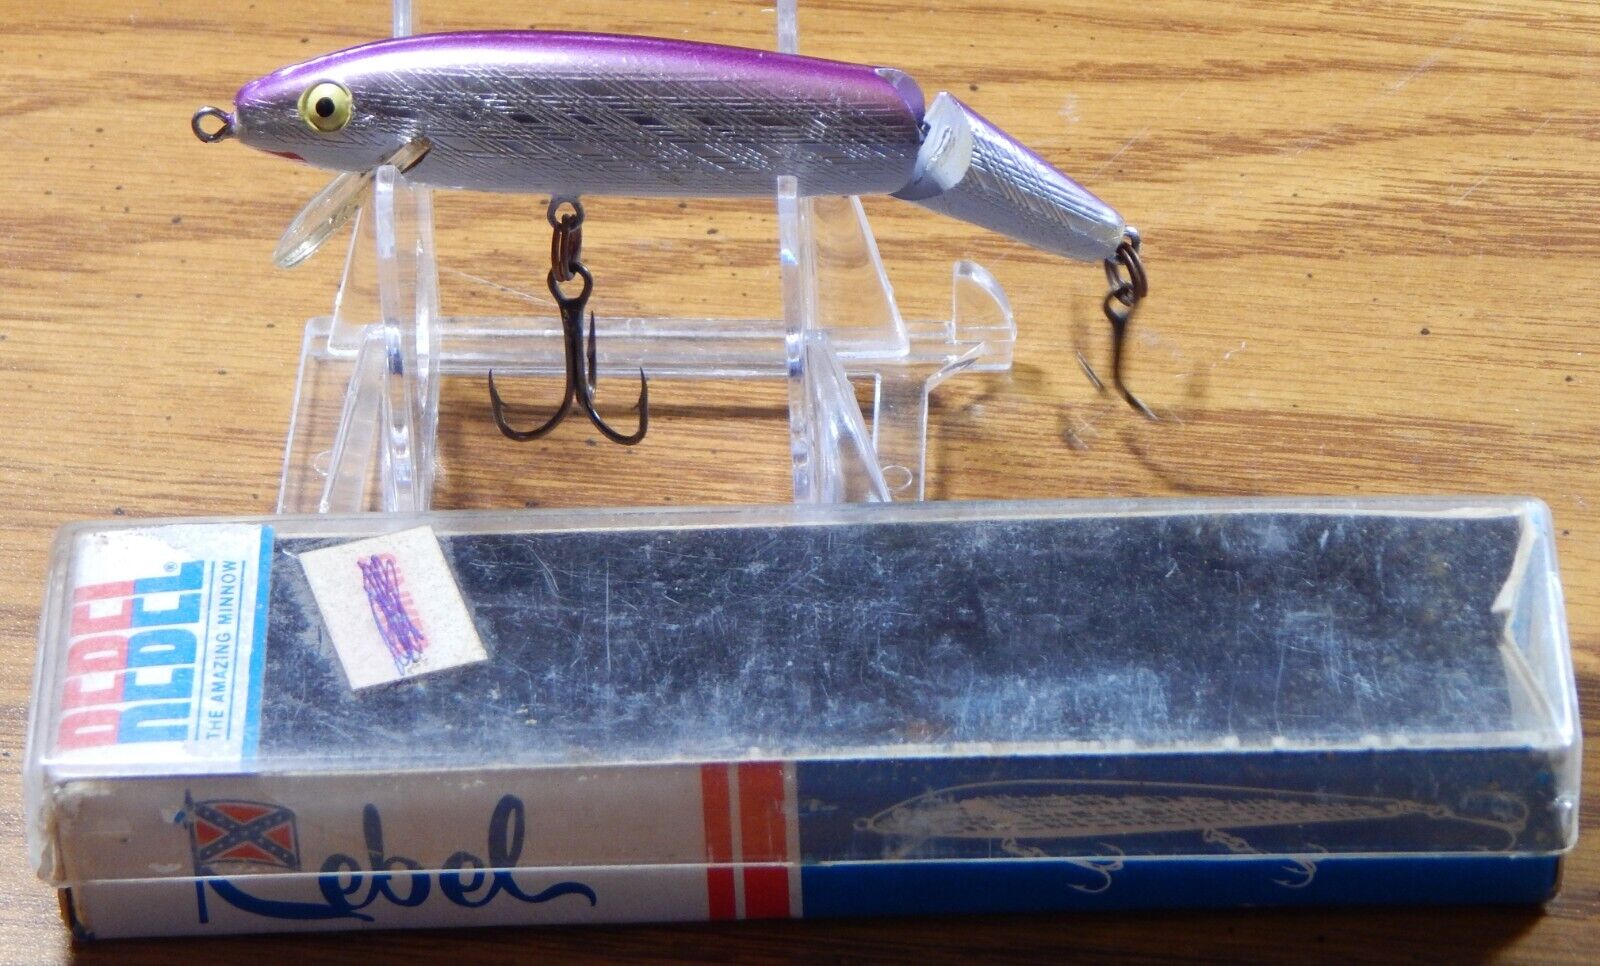 OLD REBEL PURPLE JOINTED MINNOW LURE 3 1/2  LONG NEW IN BOX LQQK